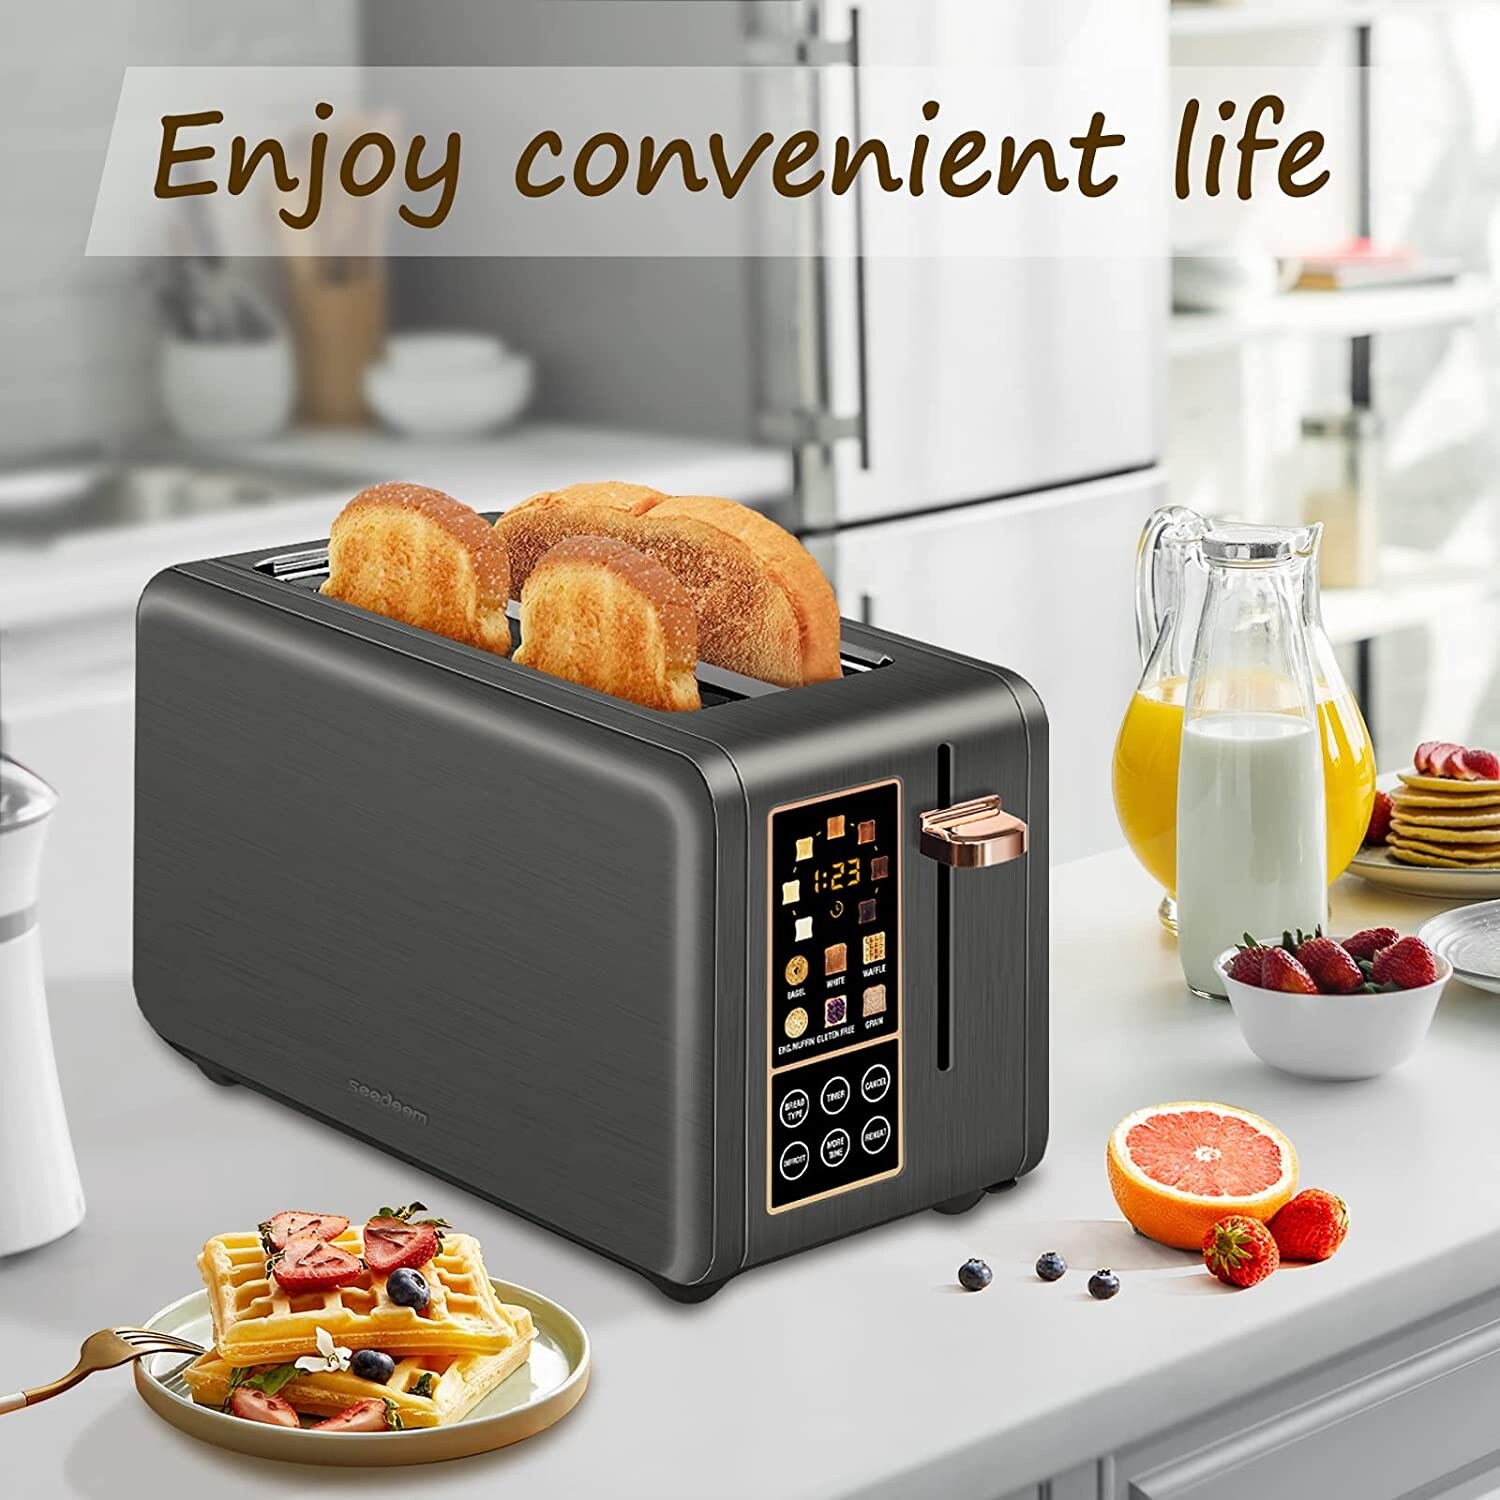 https://ak1.ostkcdn.com/images/products/is/images/direct/c14f056d9874cdc5d2ca7aeb68ebf0f5986b5576/Toaster-4-Slice%2C-Long-Slot-Toaster-with-LCD-Display-Touch-Buttons%2C-7-Shade-Settings%2C-6-Bread-Selection%2C-Stainless-Steel-Toaster.jpg